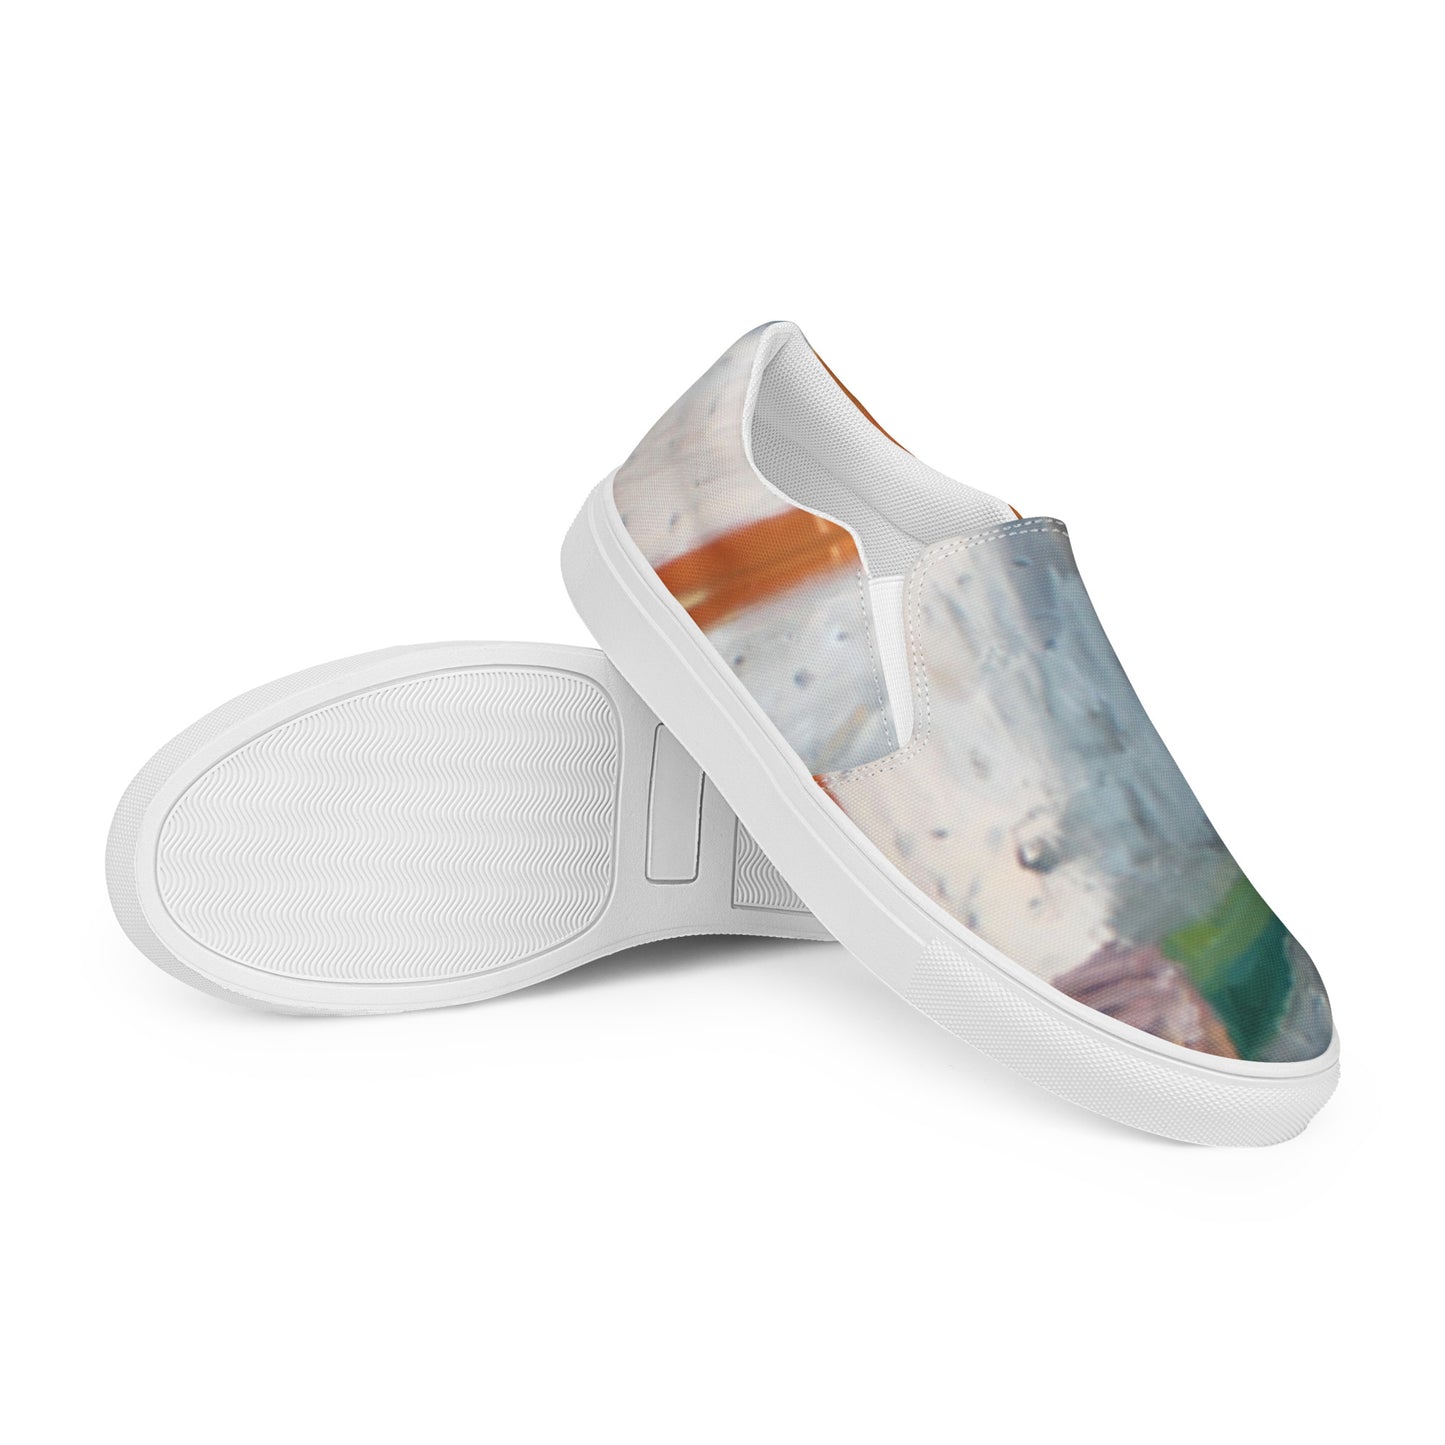 The Couple - Women’s slip-on canvas shoes